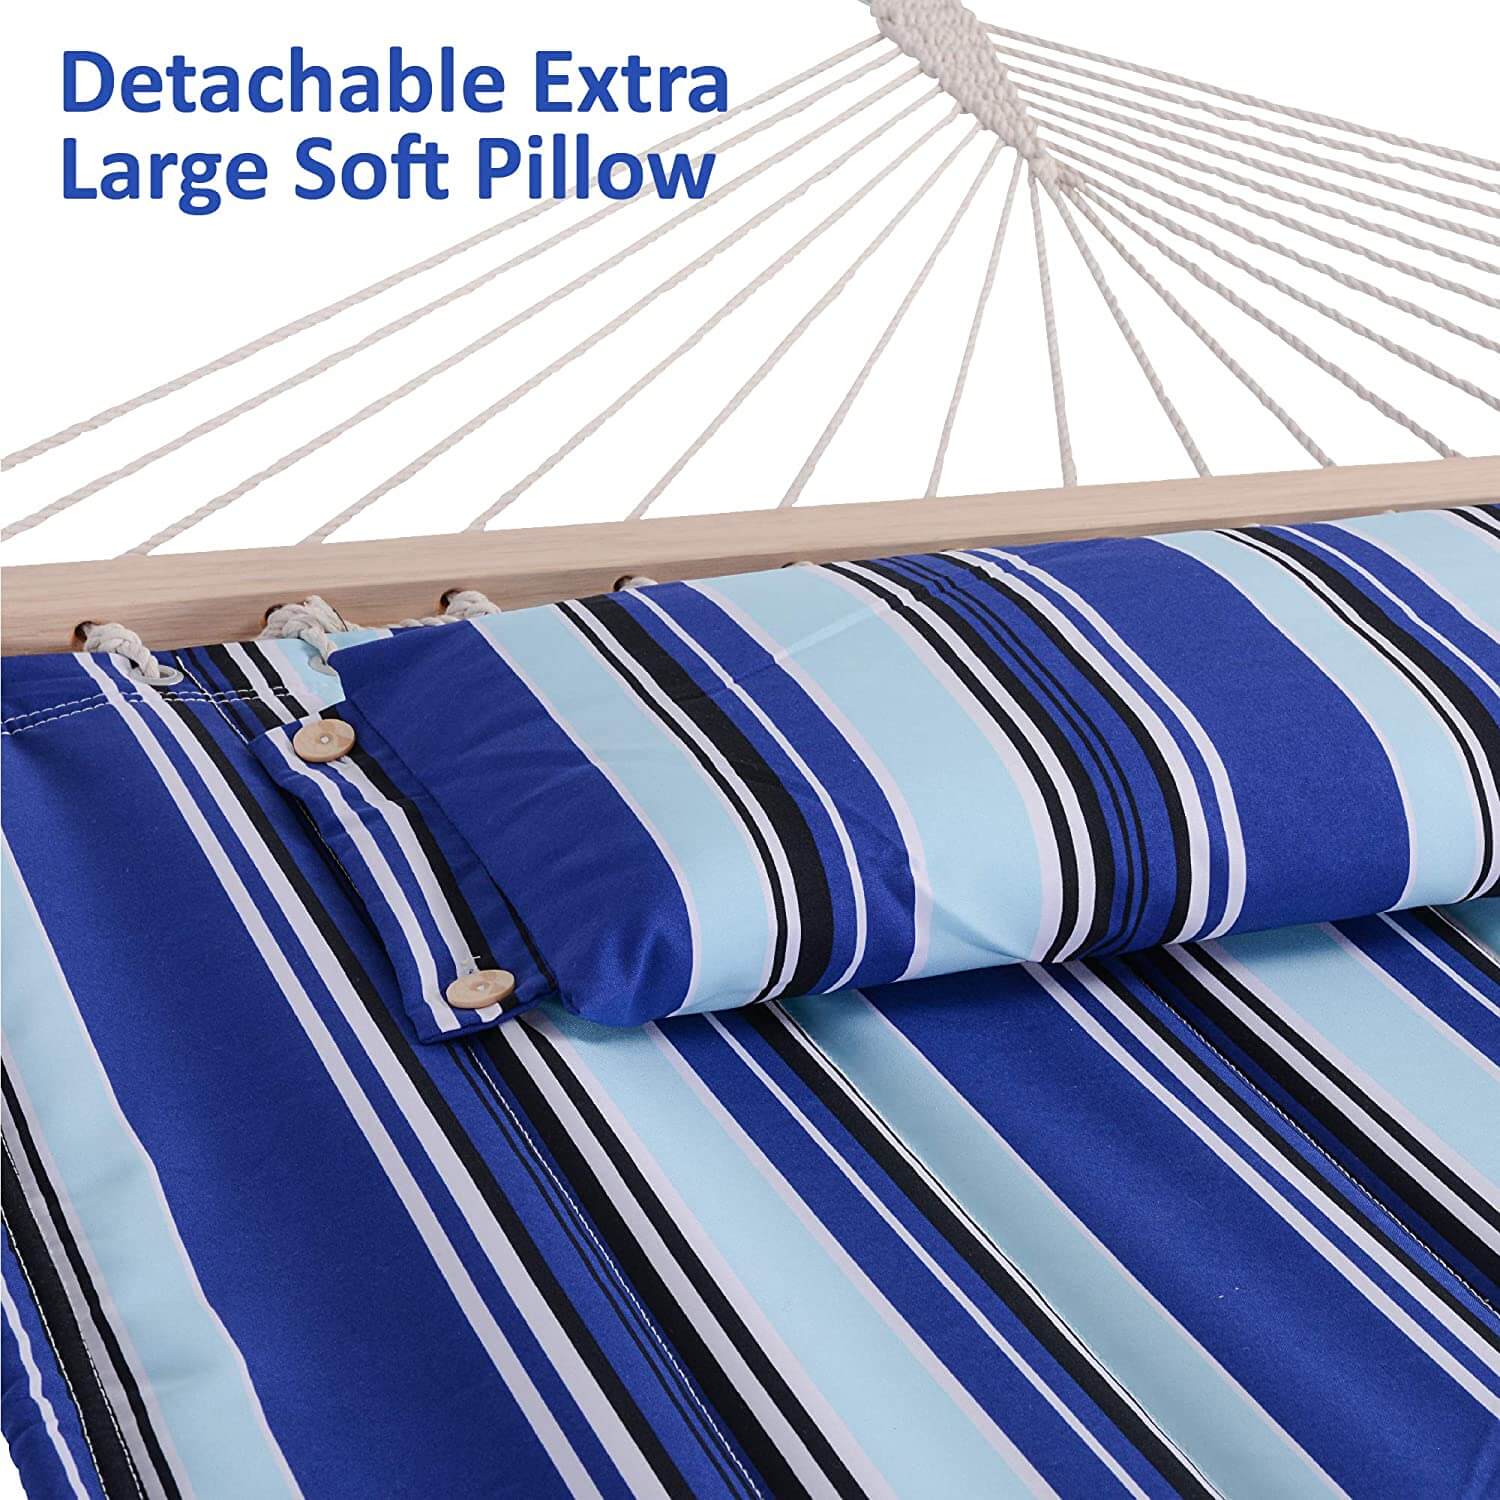 SUNCREAT Quilted Fabric Hammock, Blue Stripes#color_blue-stripes